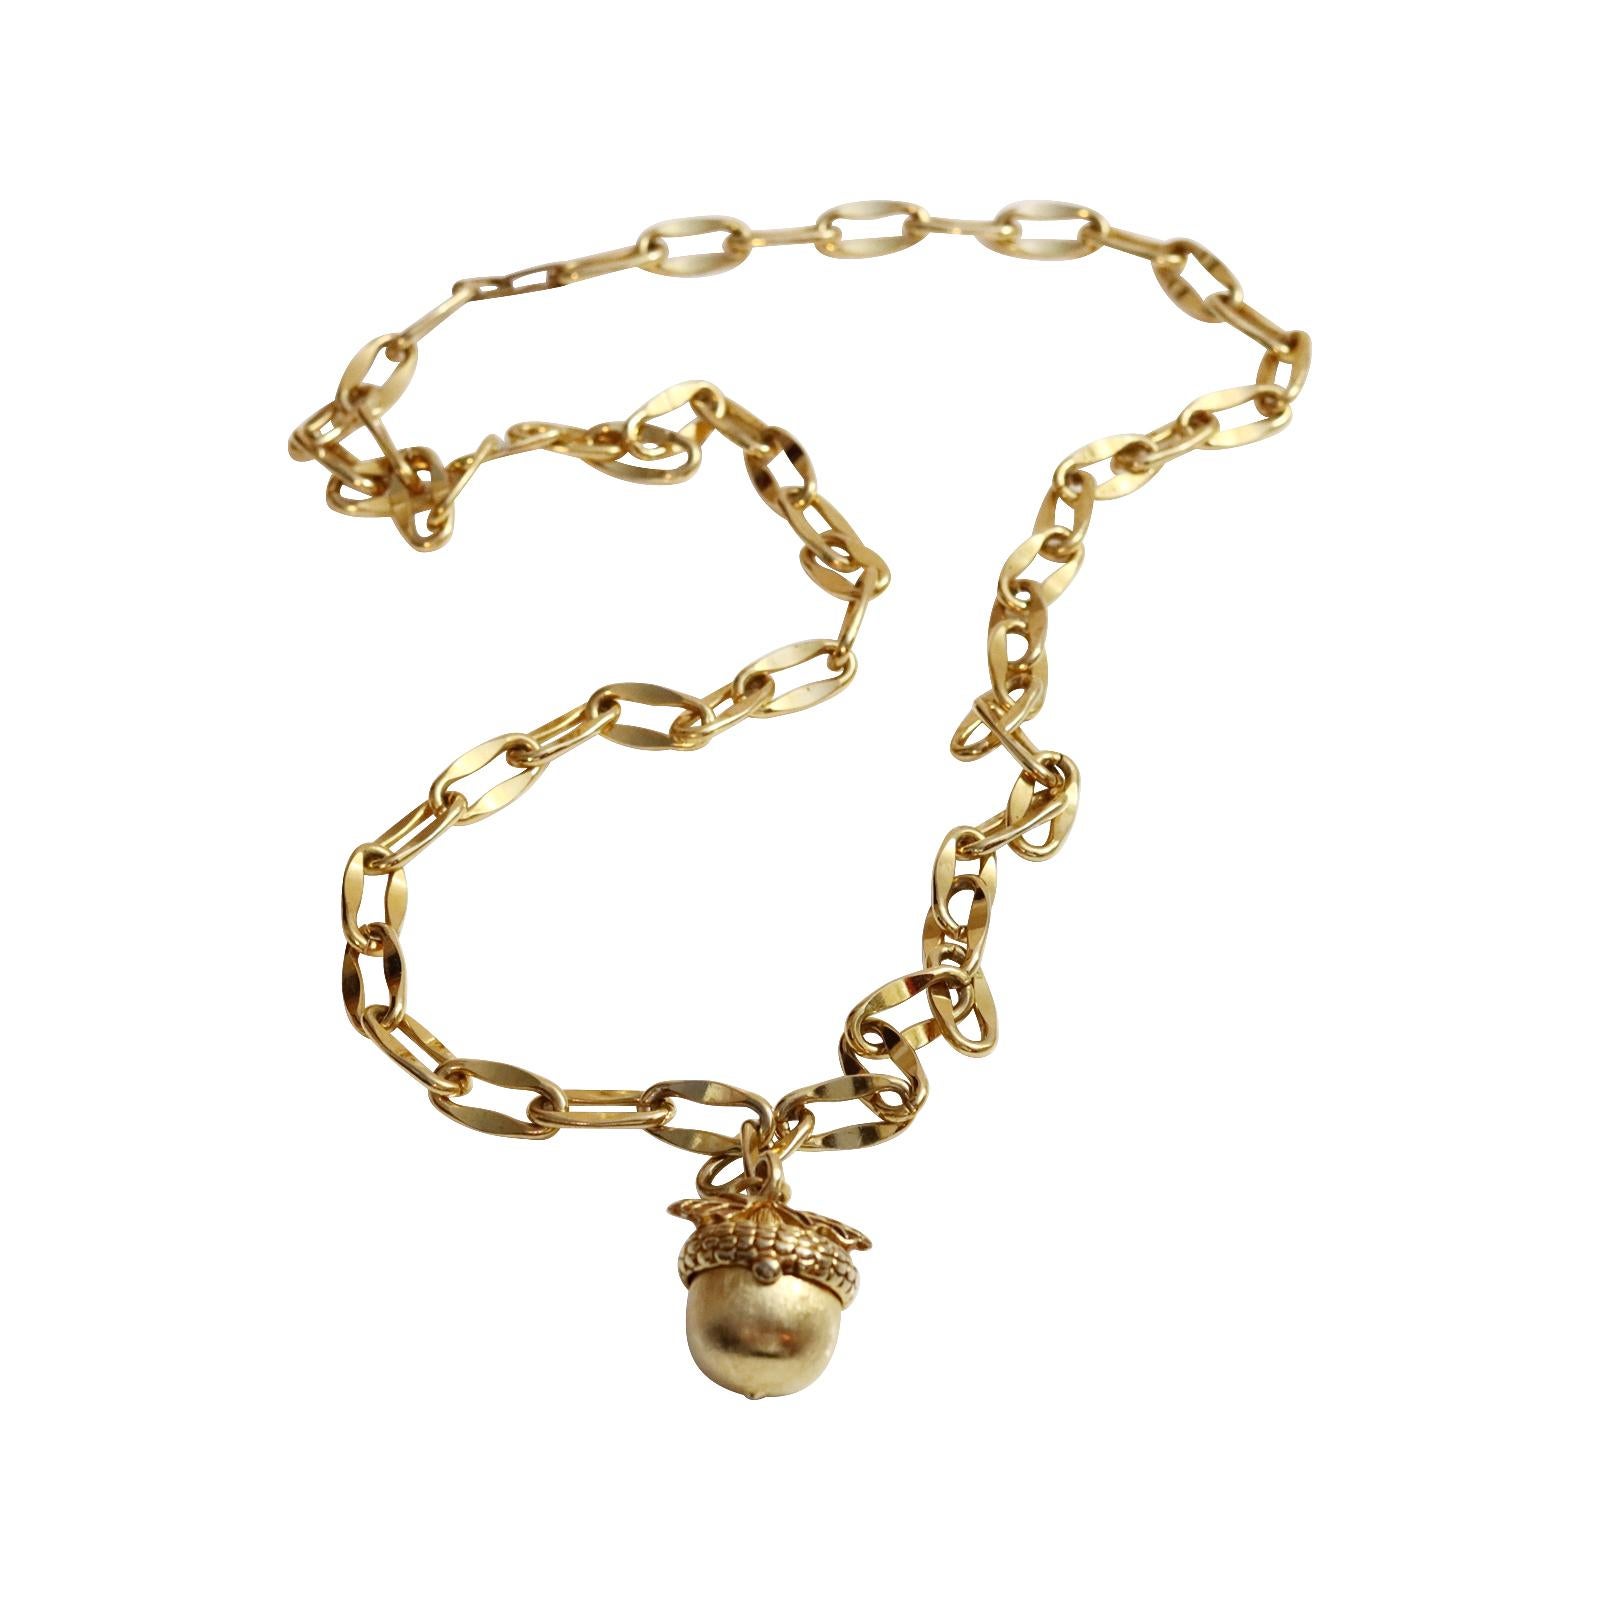 Vintage Gold Tone Long Link Chain with Dangling Opening Fob Circa 1980's For Sale 4